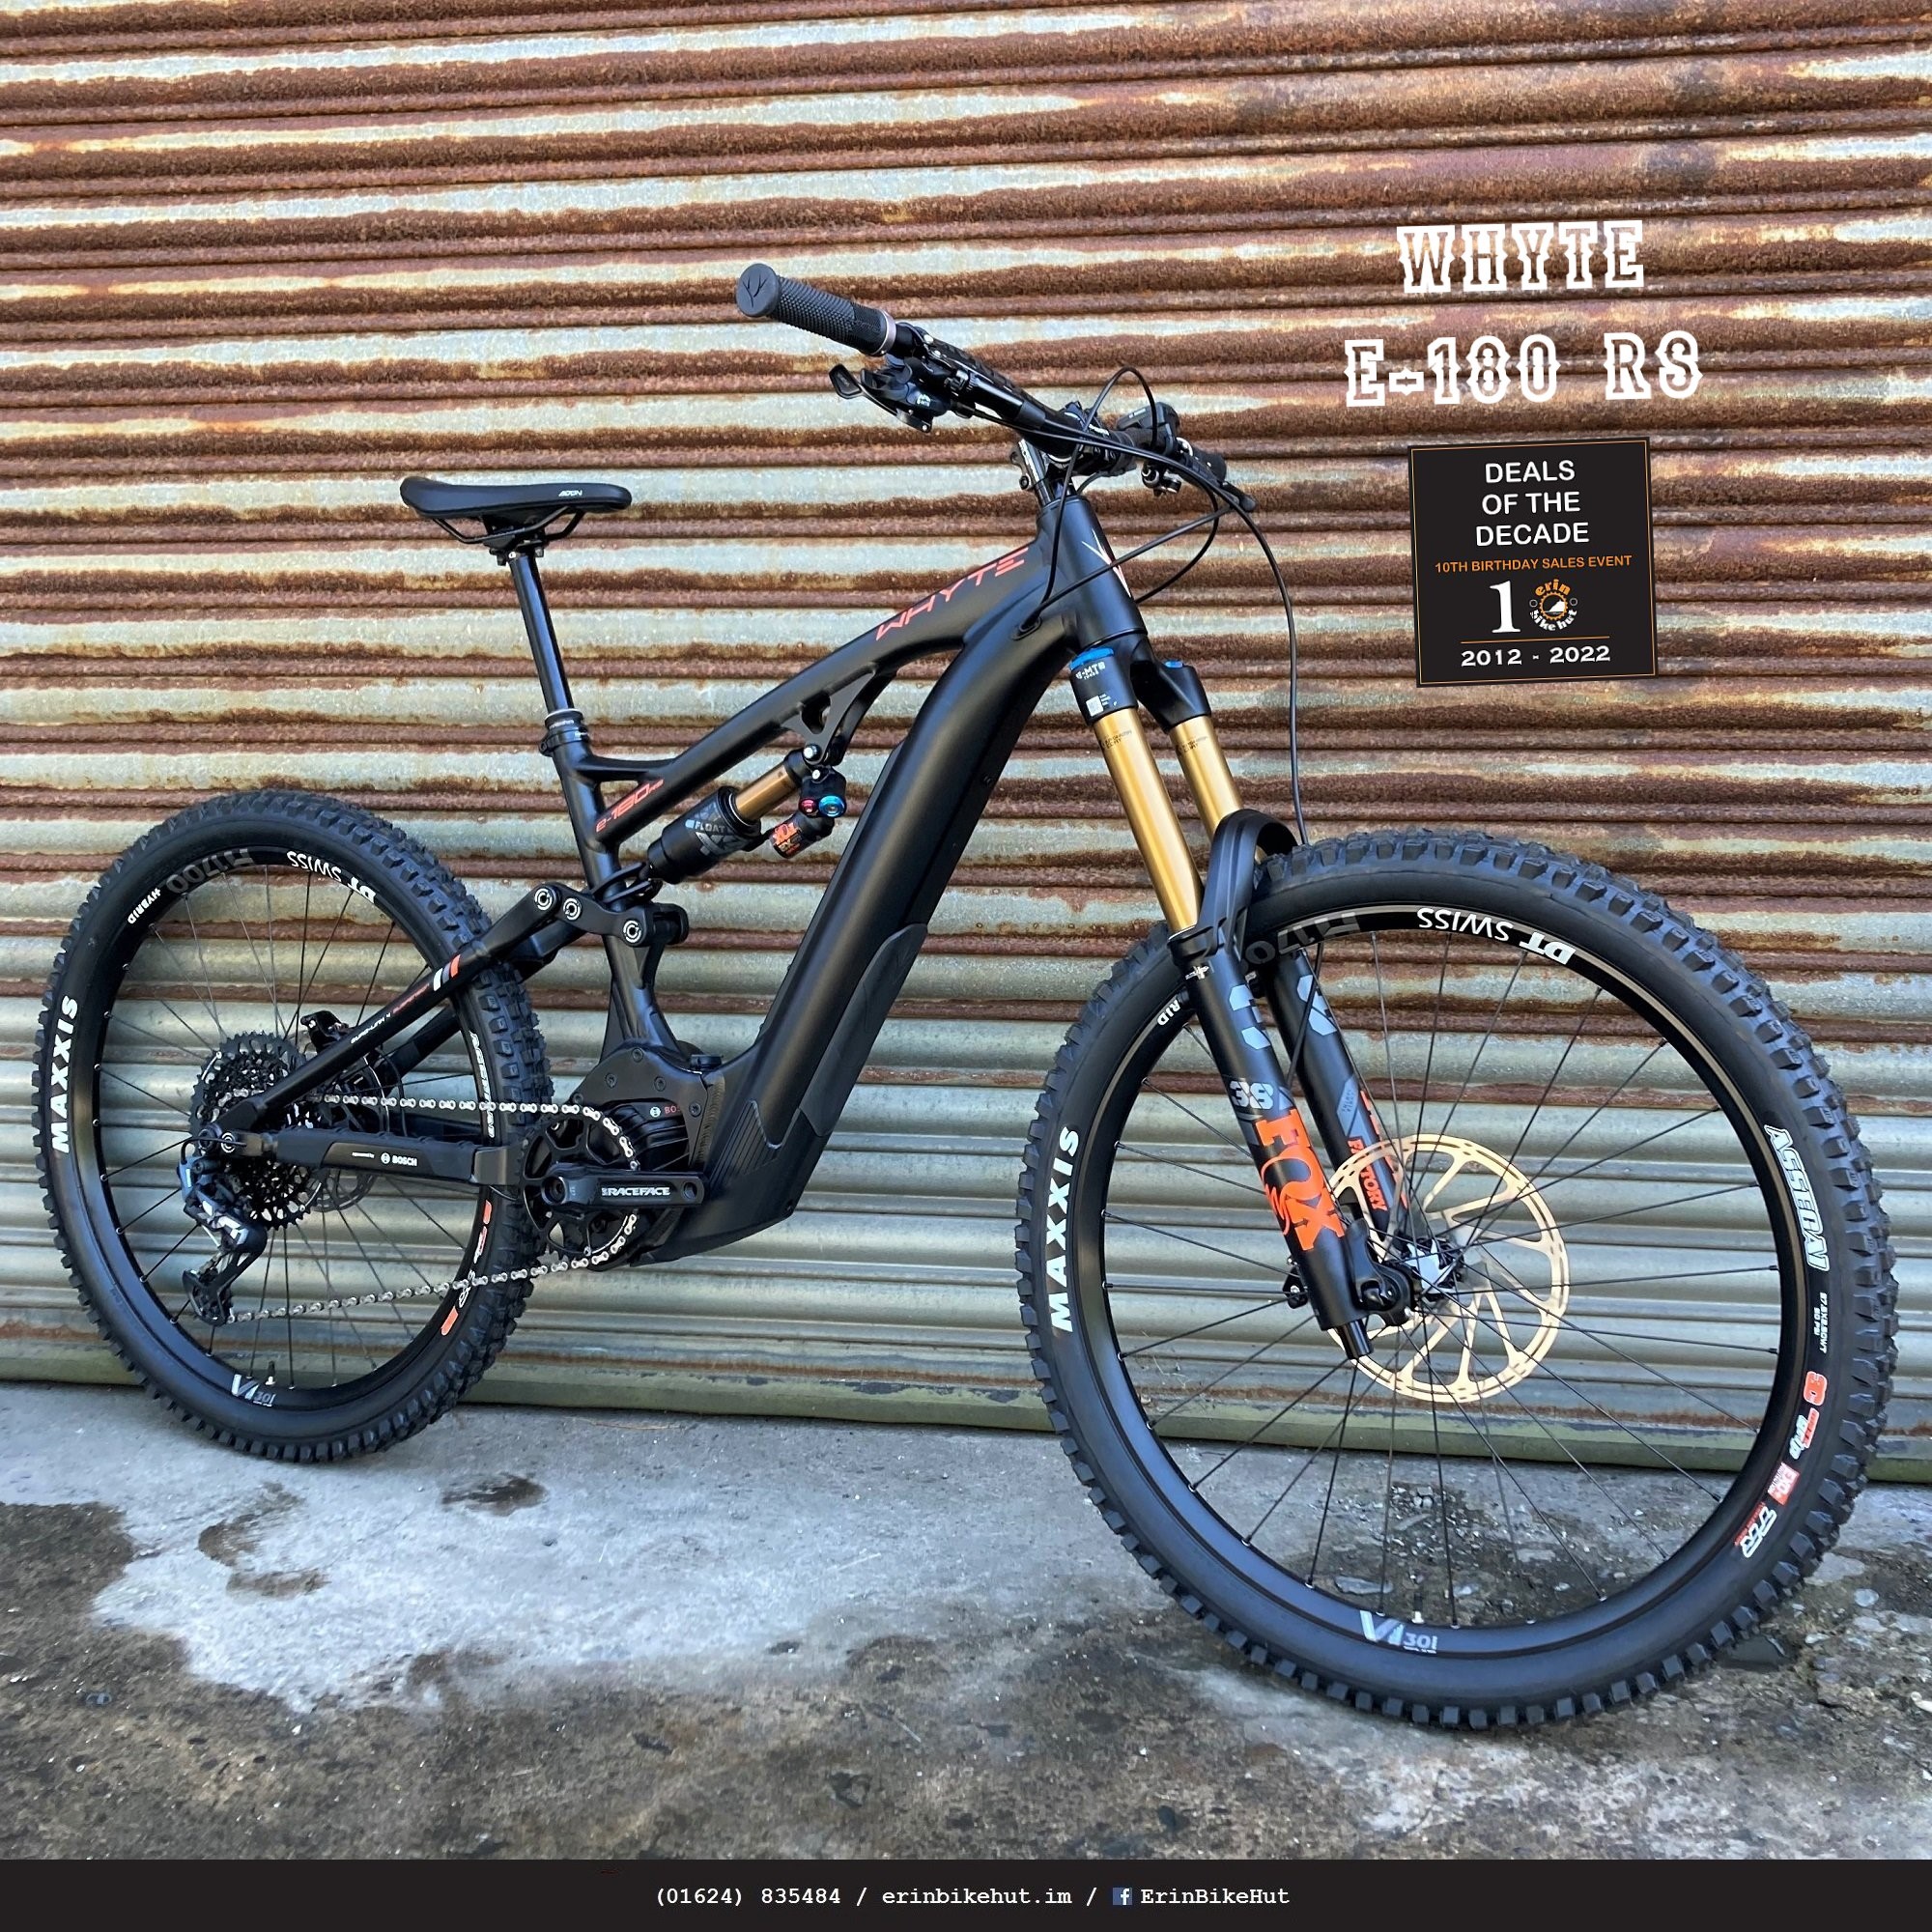 ⚡️ Whyte E-180 RS